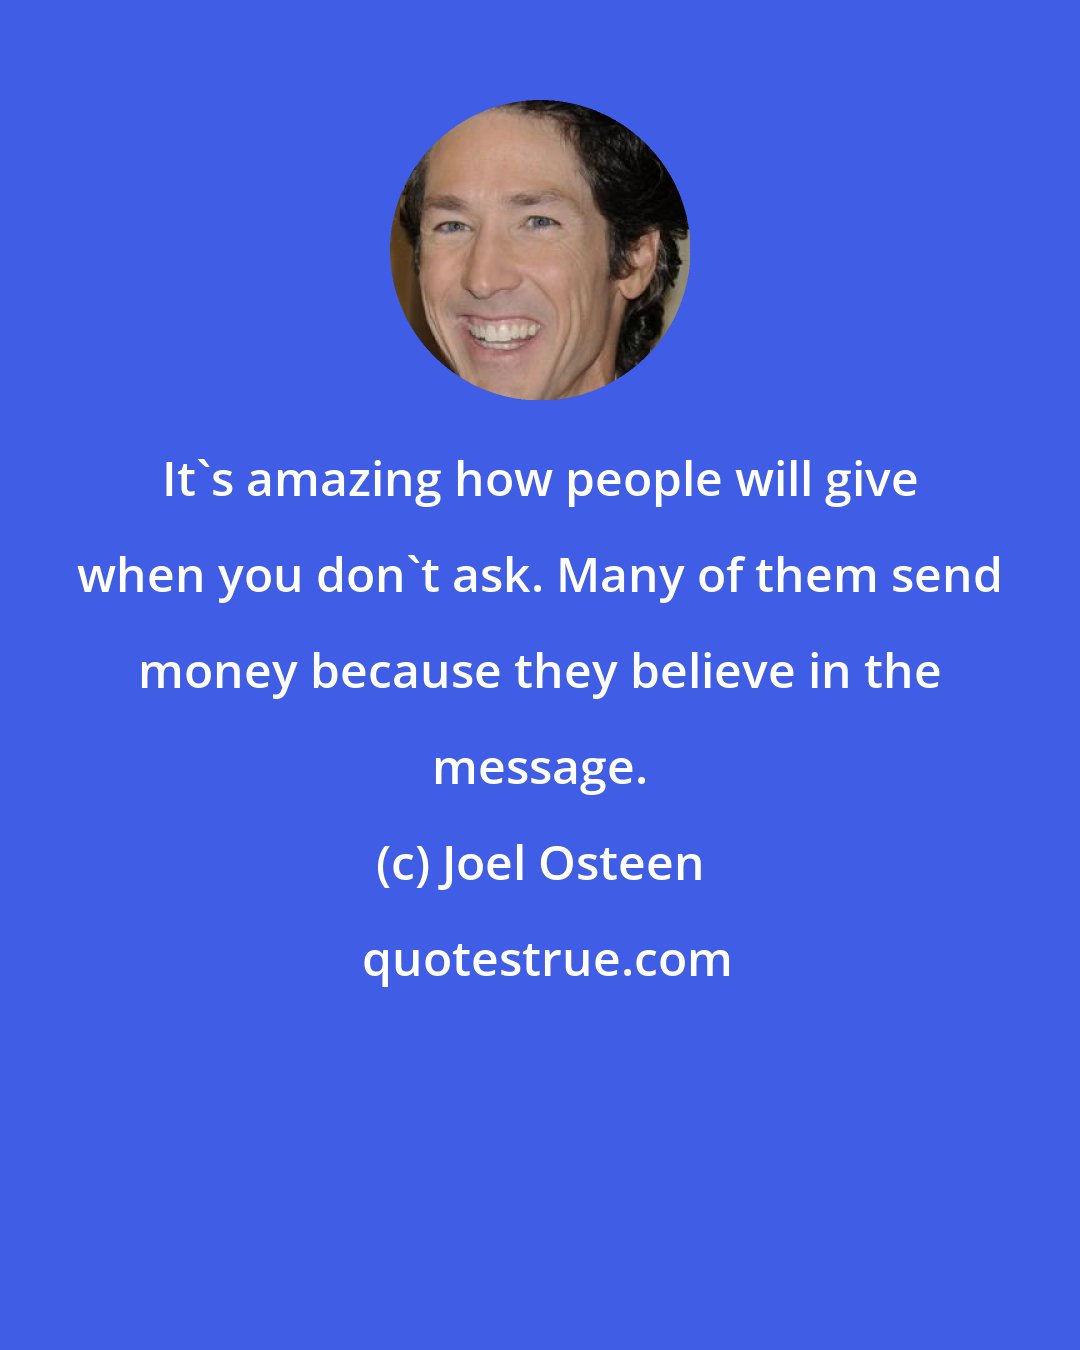 Joel Osteen: It's amazing how people will give when you don't ask. Many of them send money because they believe in the message.